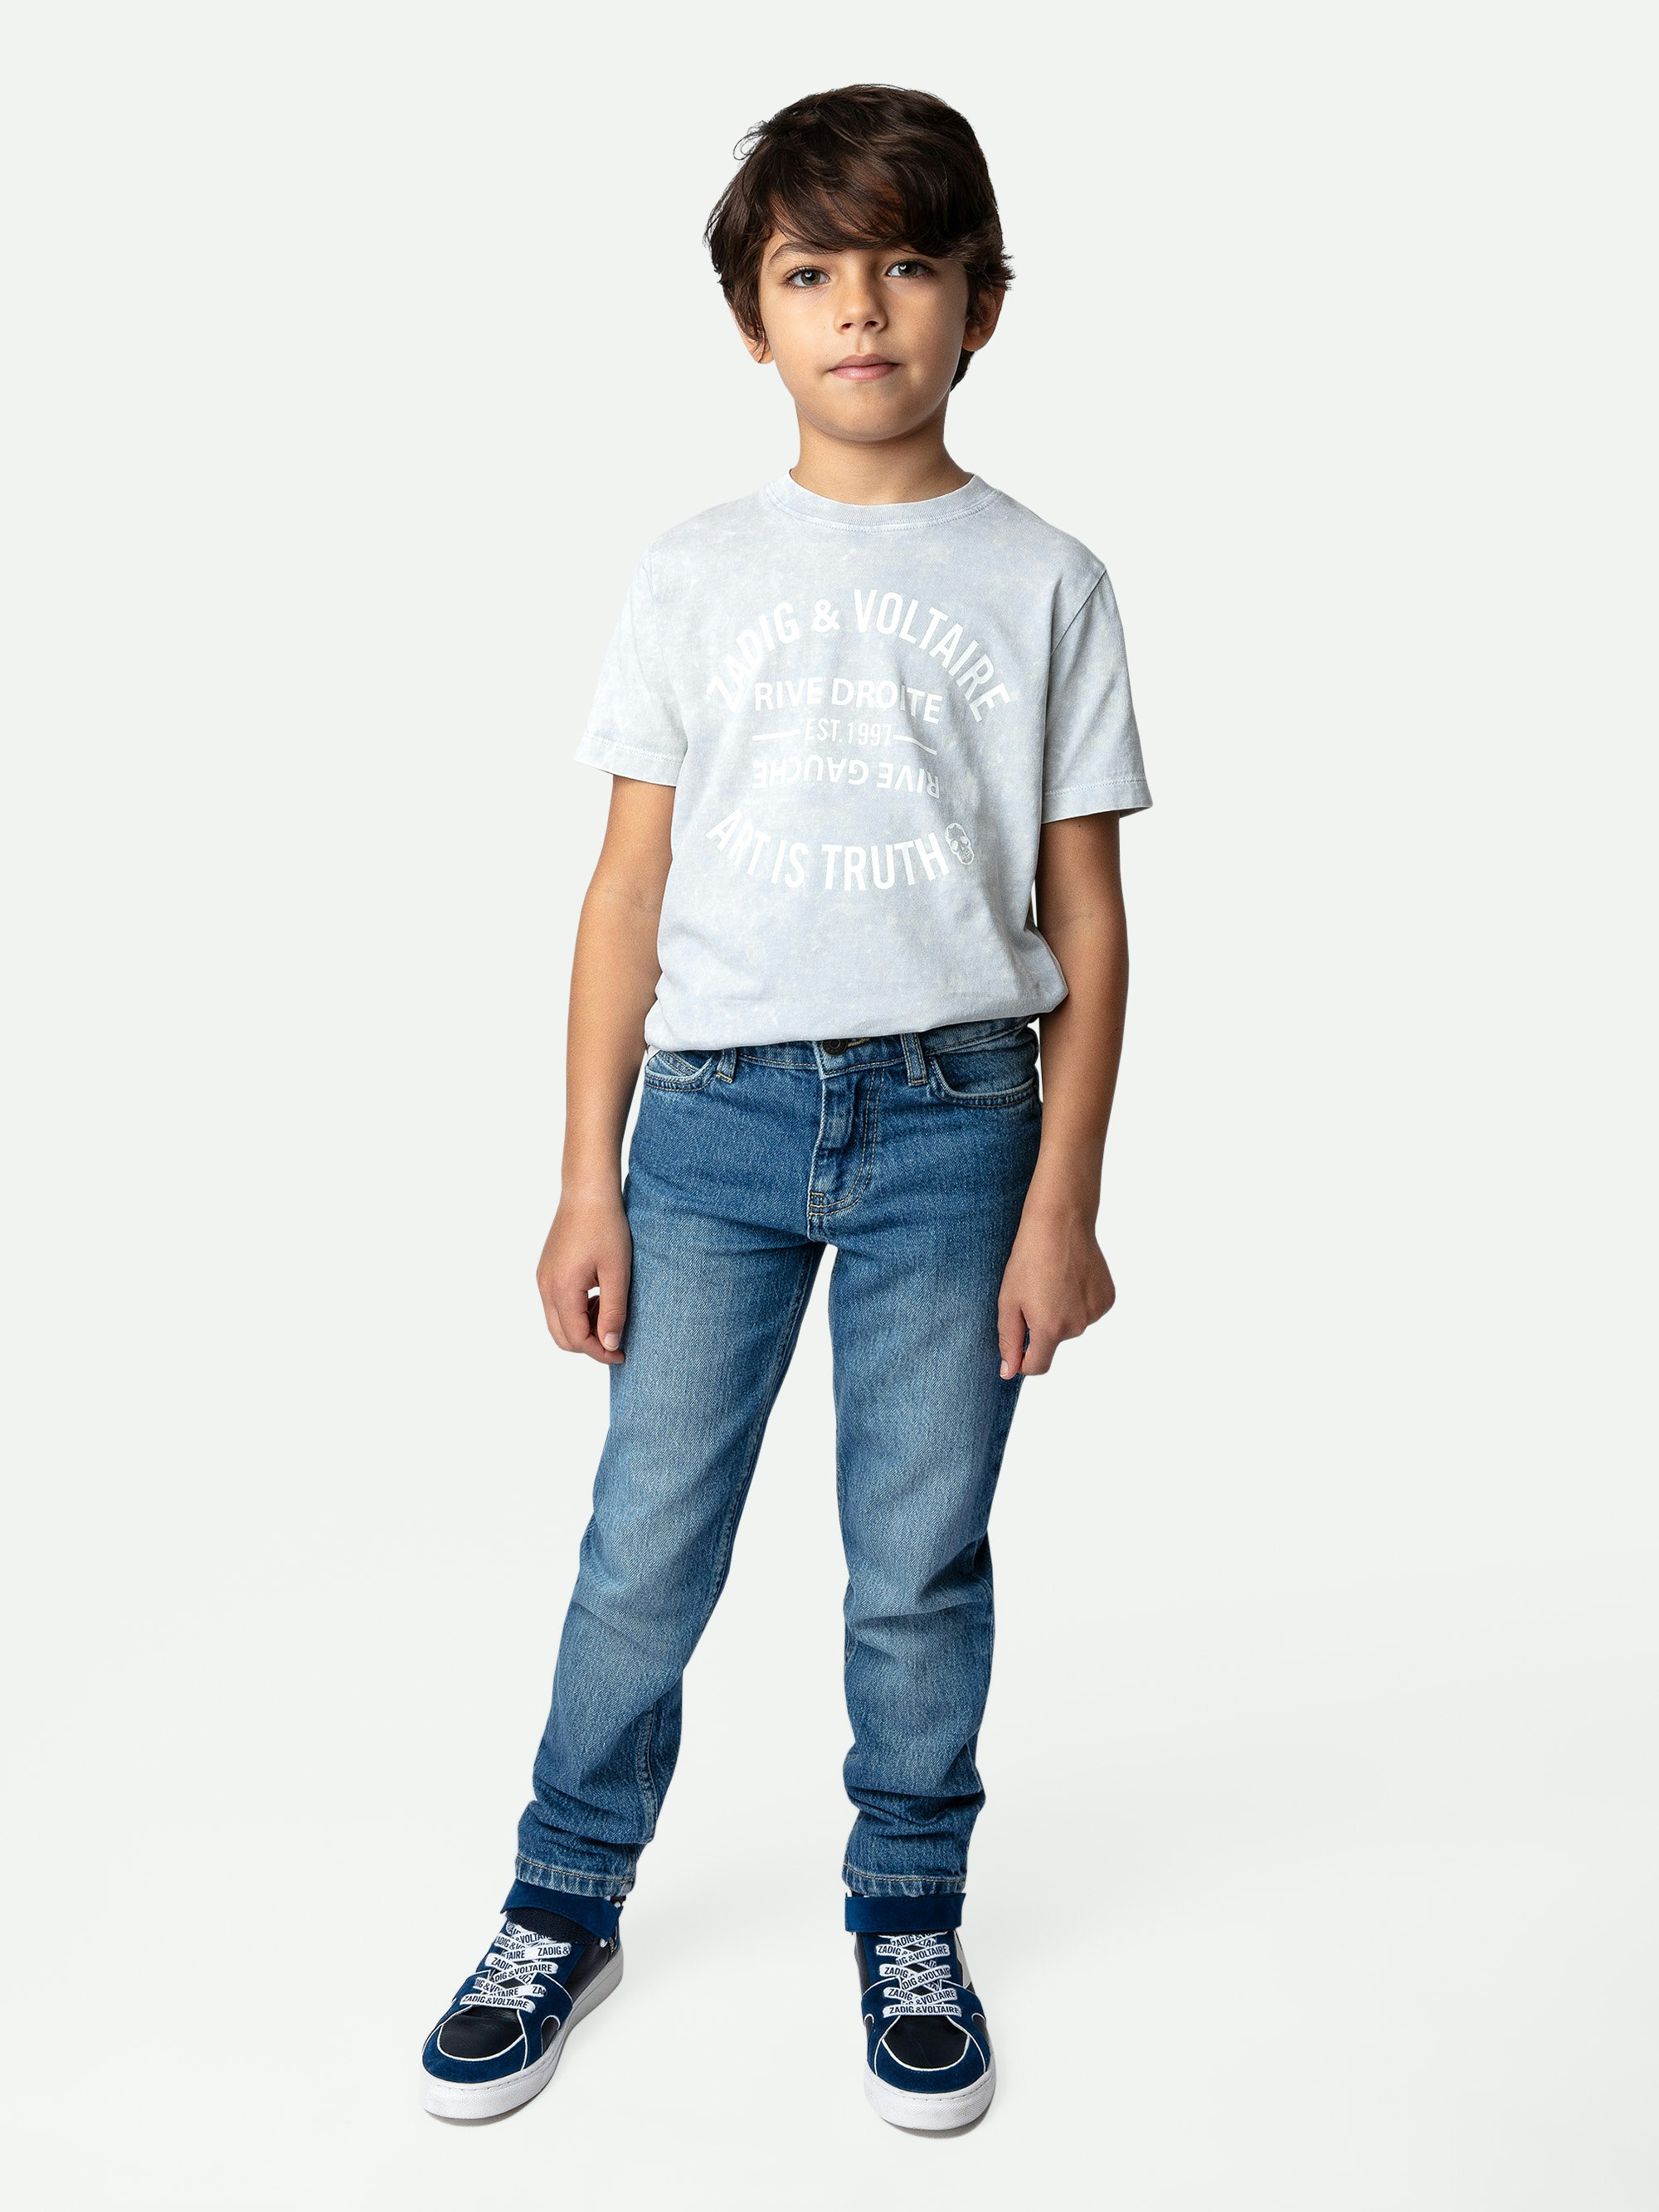 Kita Boys’ T-shirt - Boys’ snow-effect grey cotton jersey T-shirt with short sleeves and insignia.